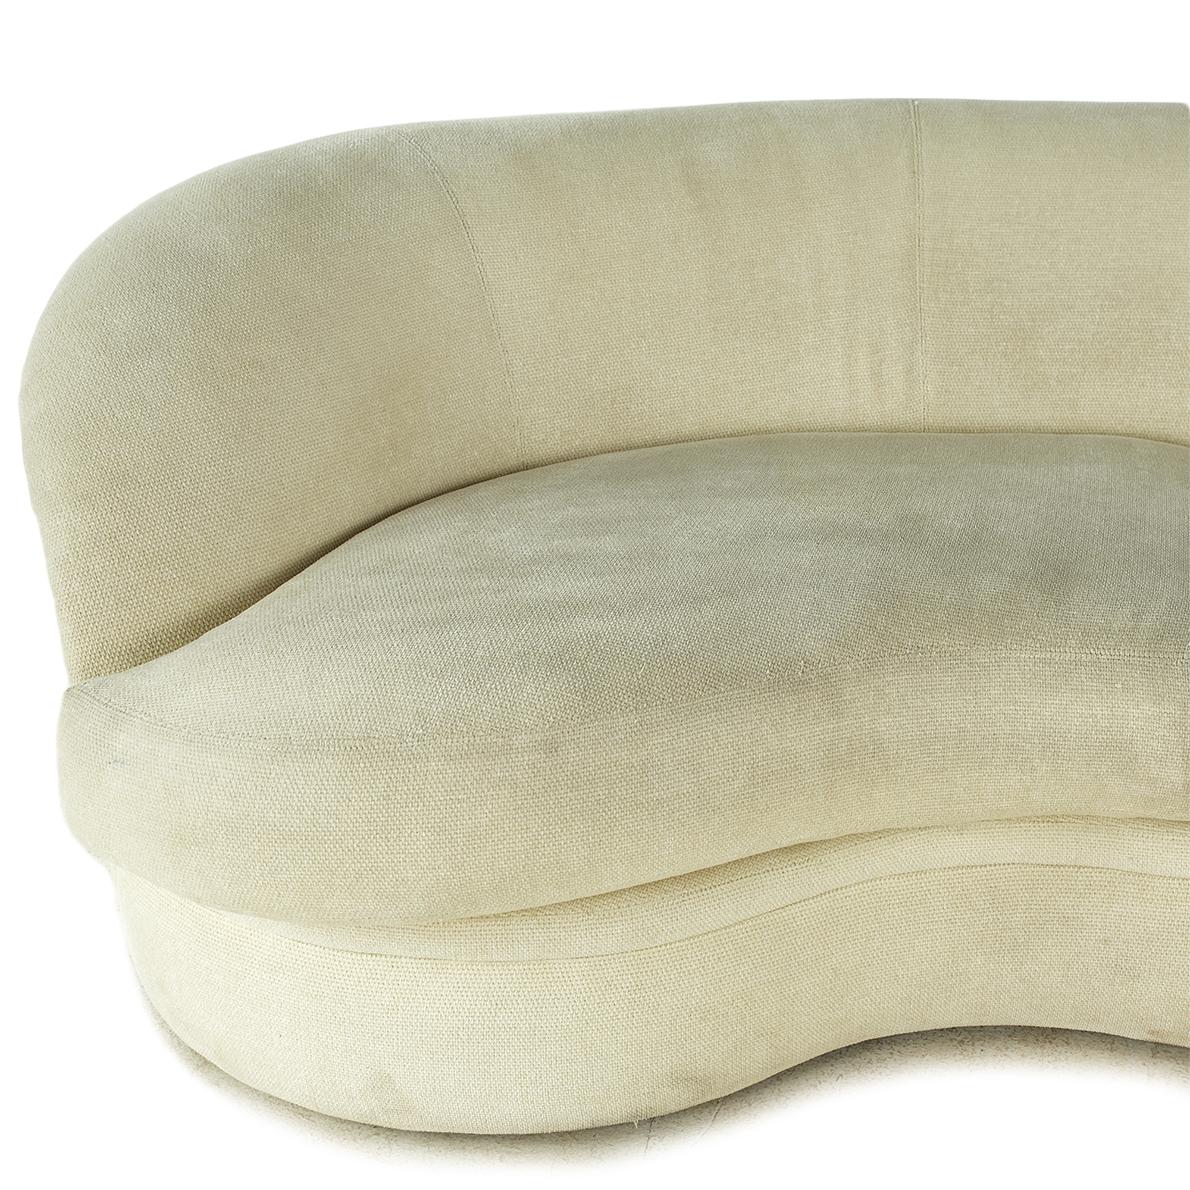 Upholstery Kagan Style Directional Furniture Midcentury Biomorphic Kidney Sofa For Sale